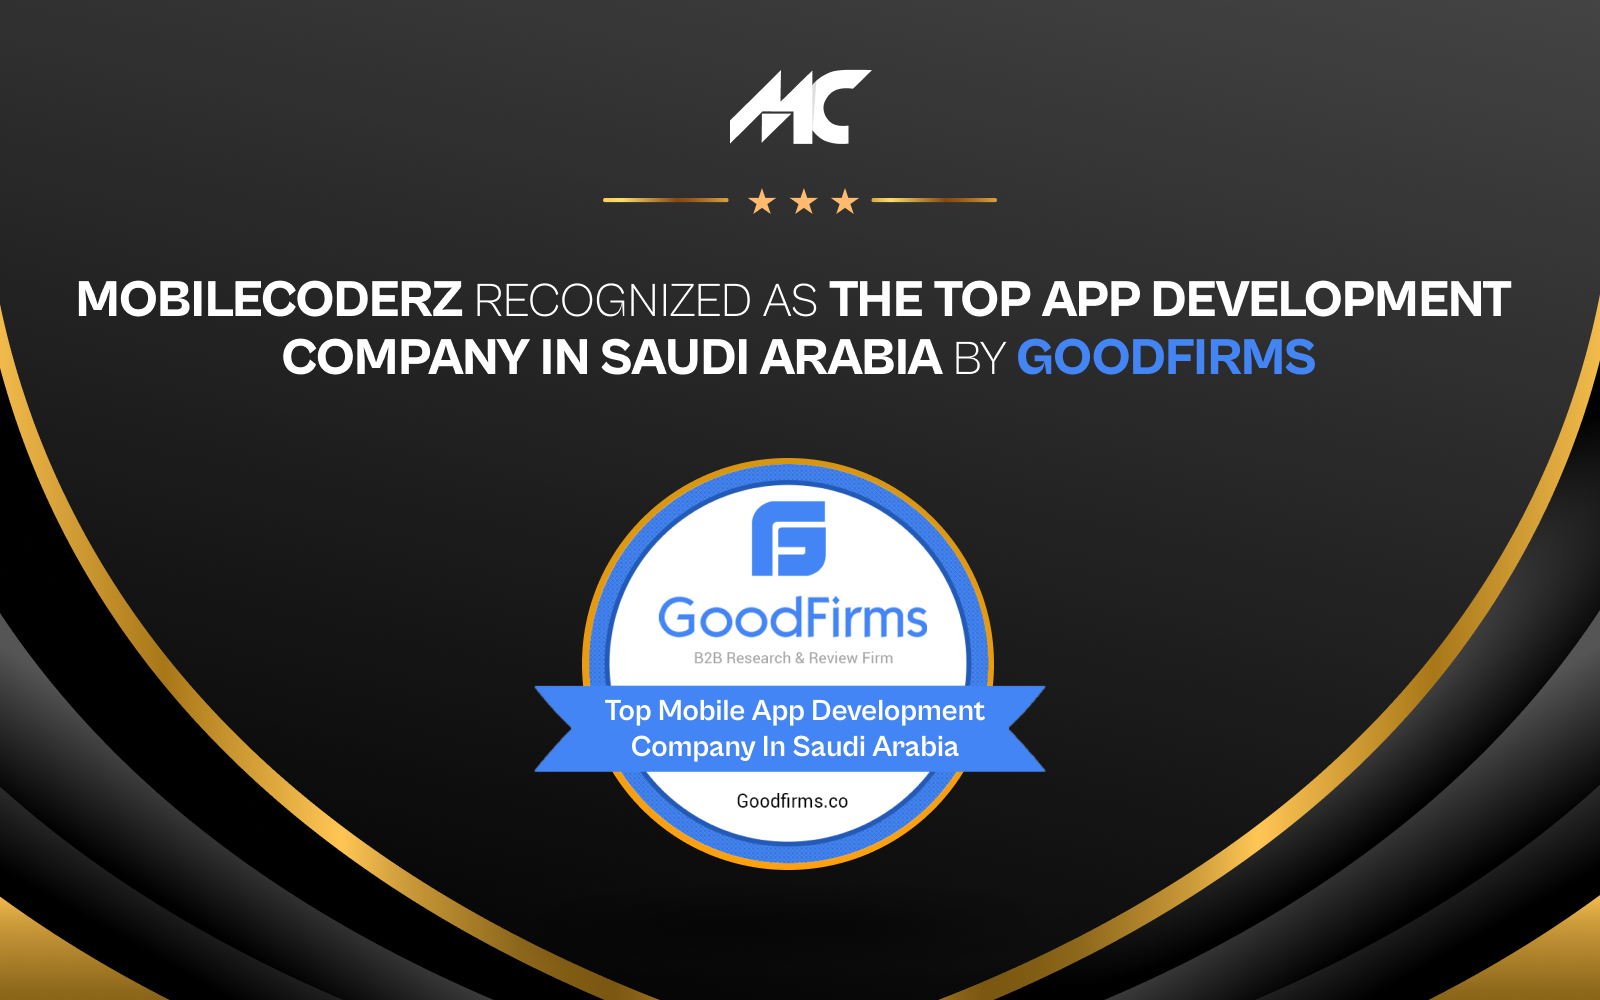 Mobilecoderz recognized as the Top App Development Company in Saudi Arabia by GoodFirms